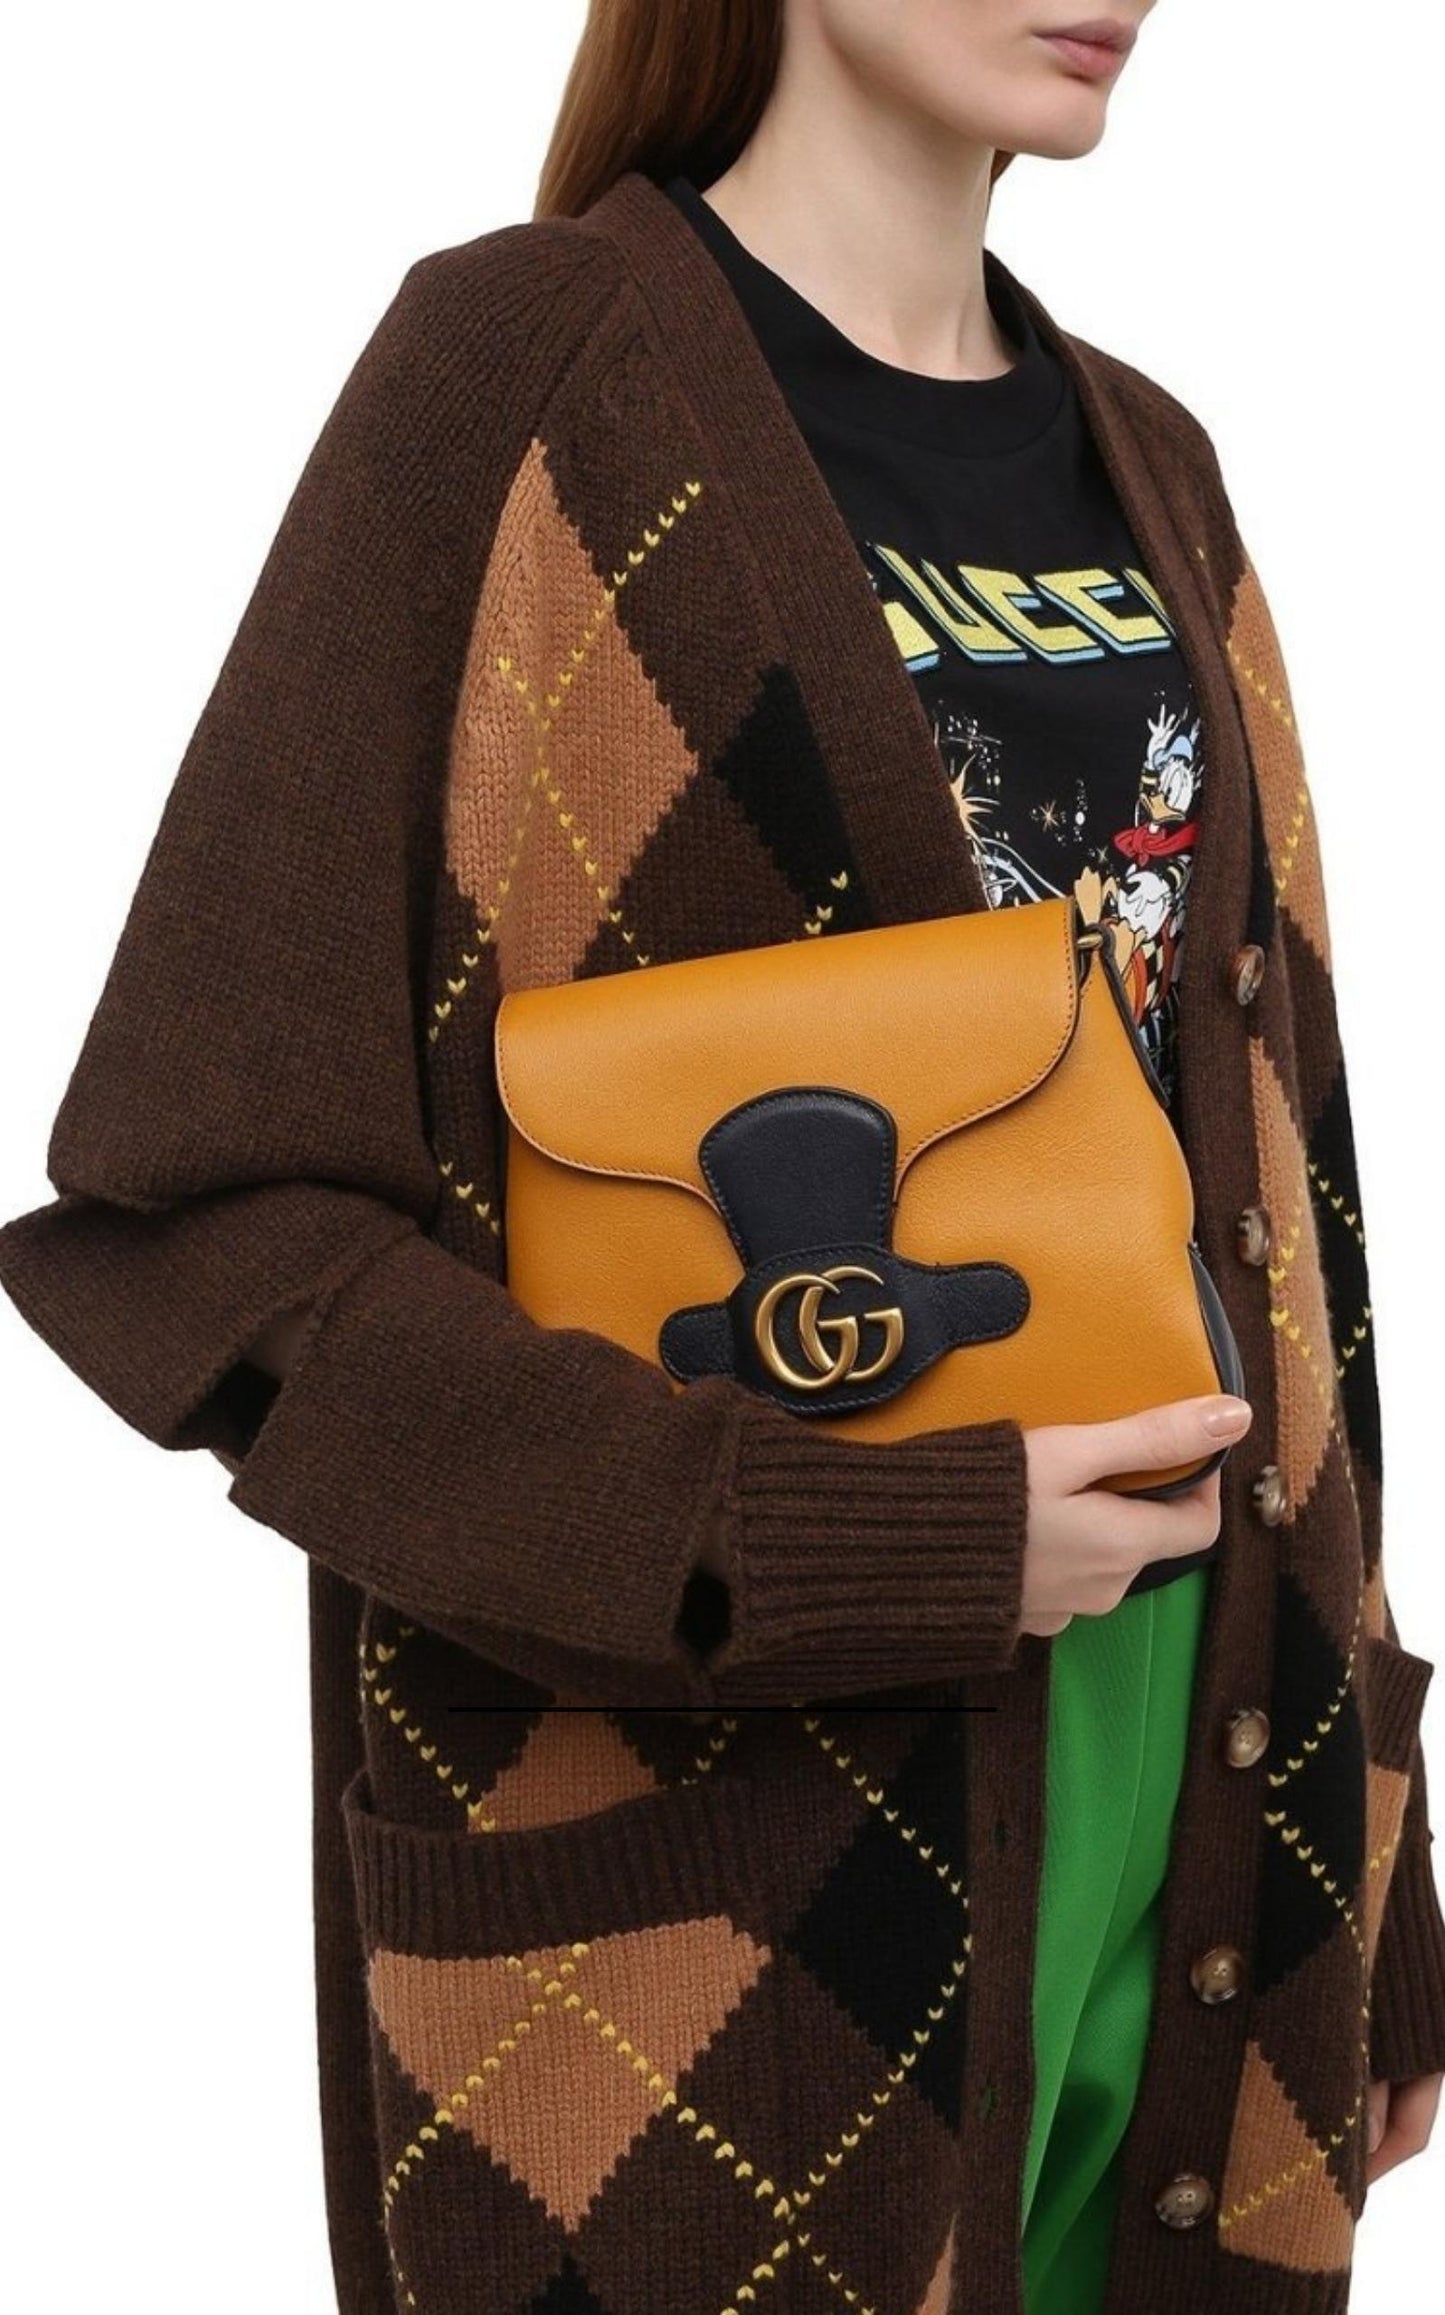  GucciSmall Messenger with Double GG Bag - Runway Catalog